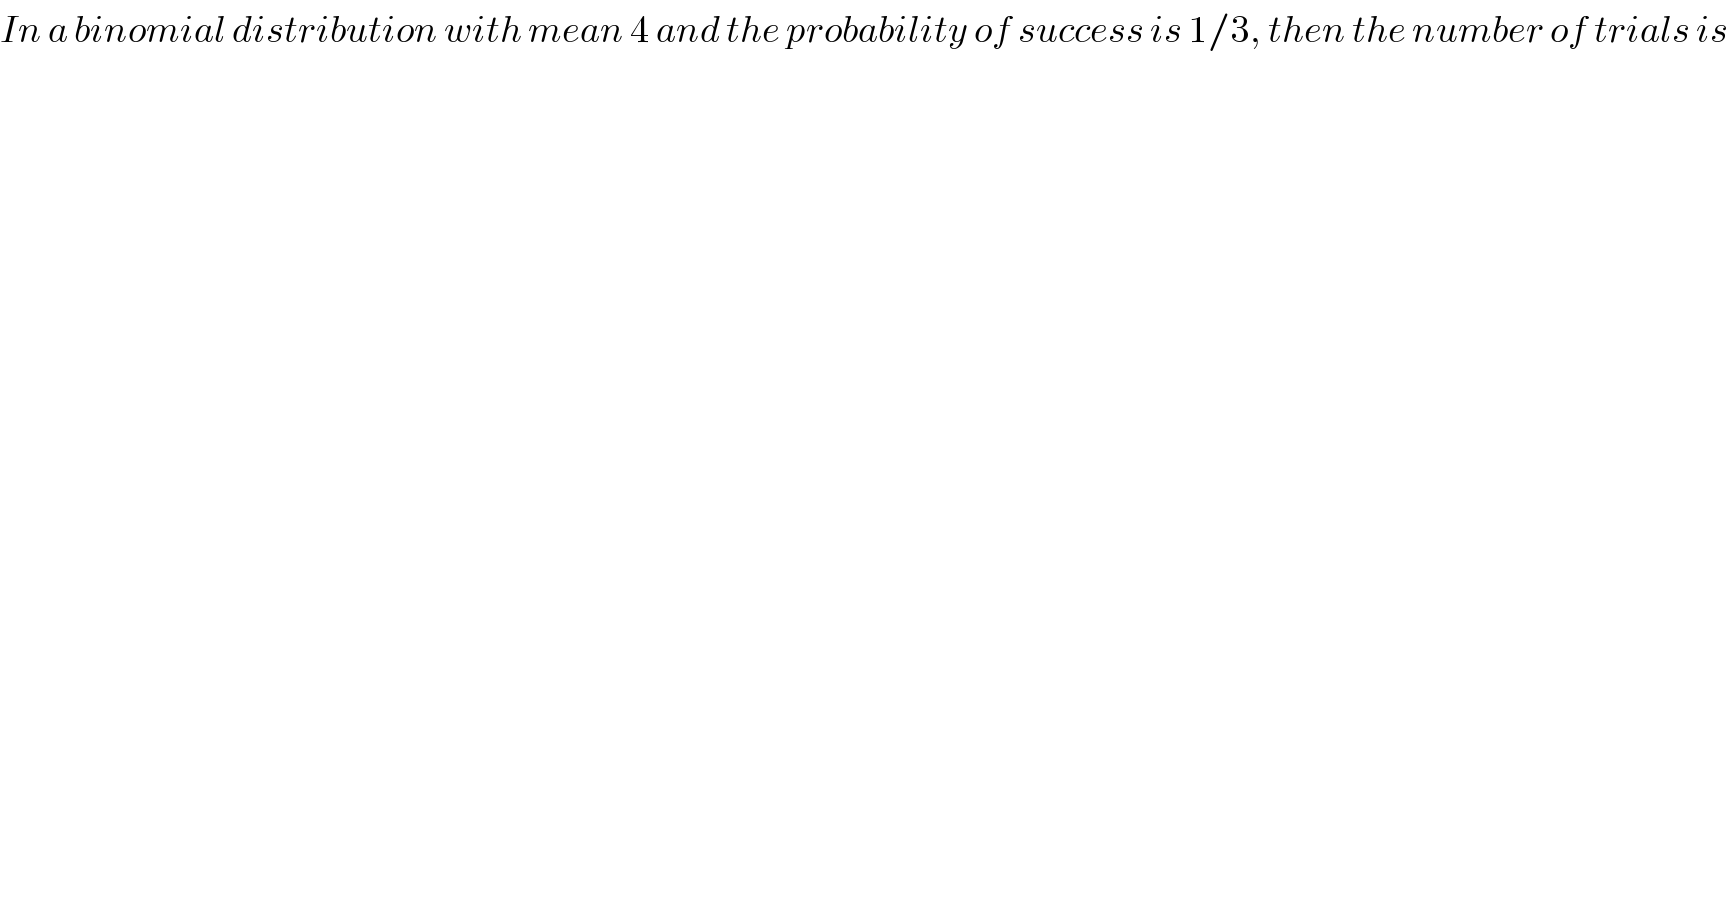 In a binomial distribution with mean 4 and the probability of success is 1/3, then the number of trials is  